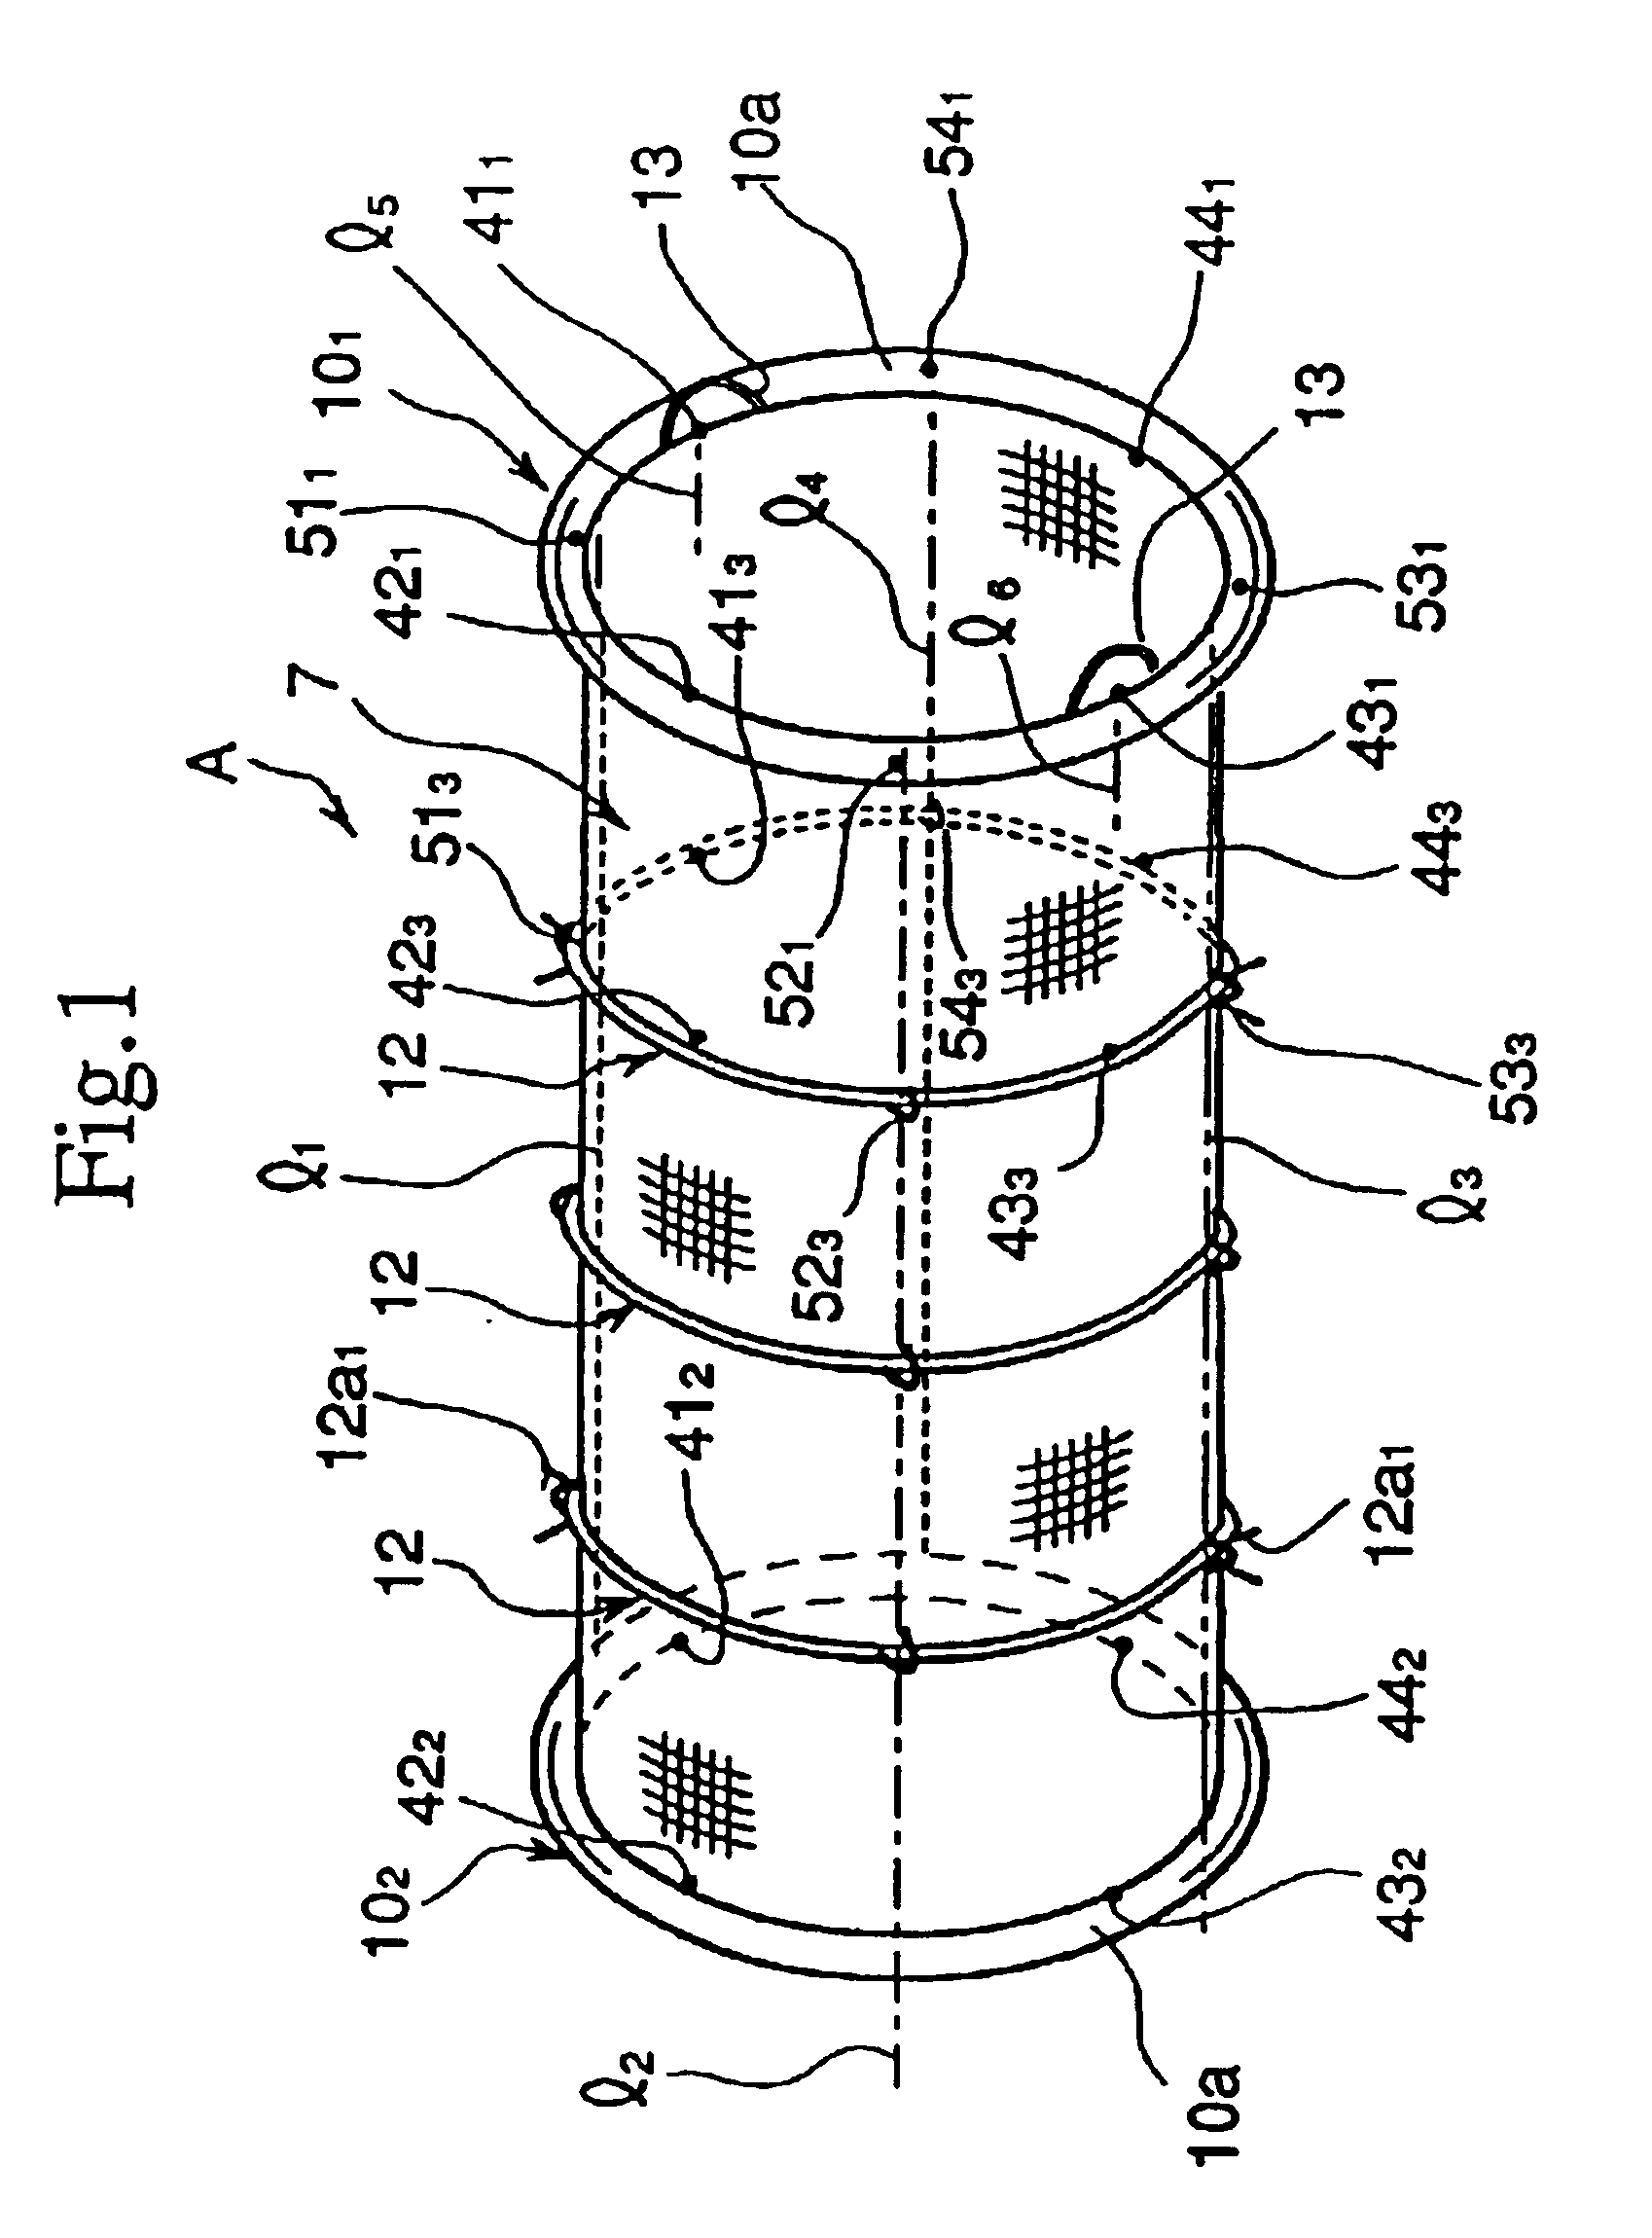 Device for handling an appliance to be implanted